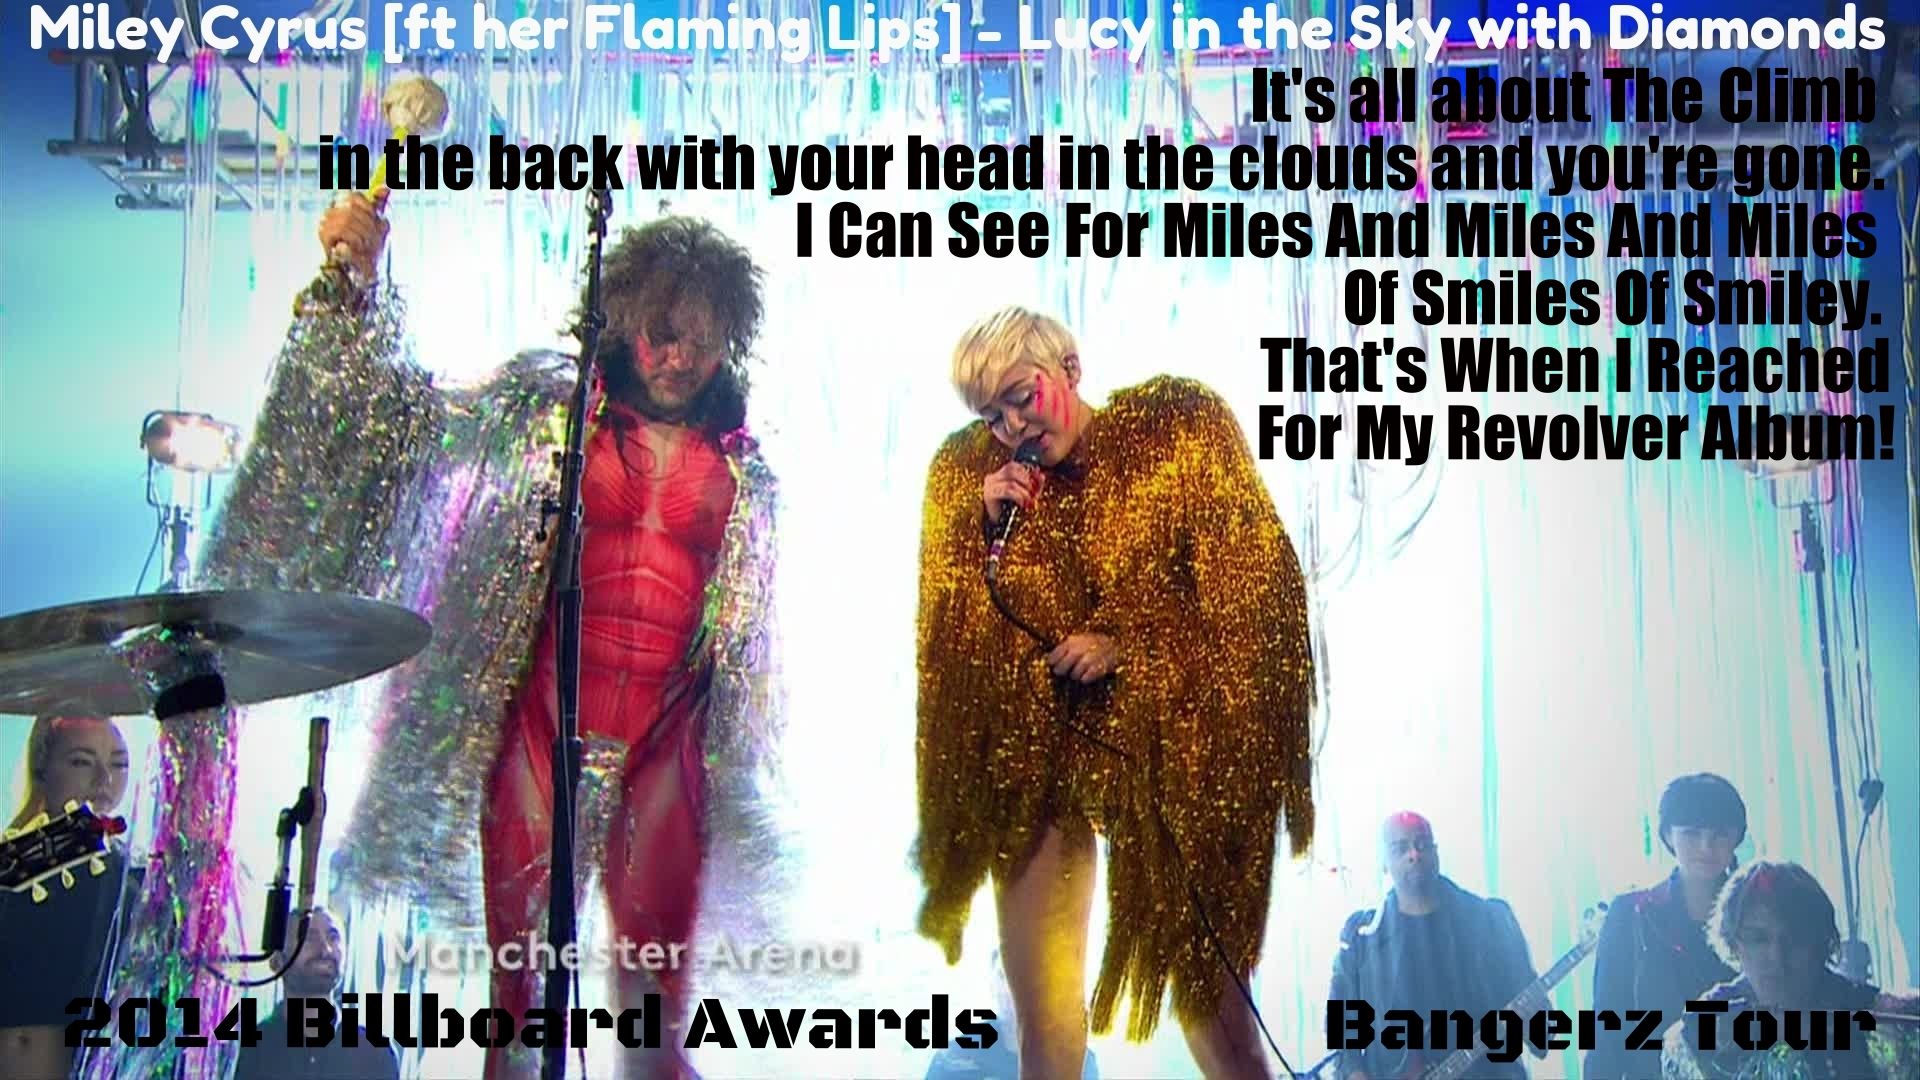 Miley Cyrus [ft The Flaming Lips] - 2014-05-18, Billboard Music Awards - 1080 TS - LSD preview 31